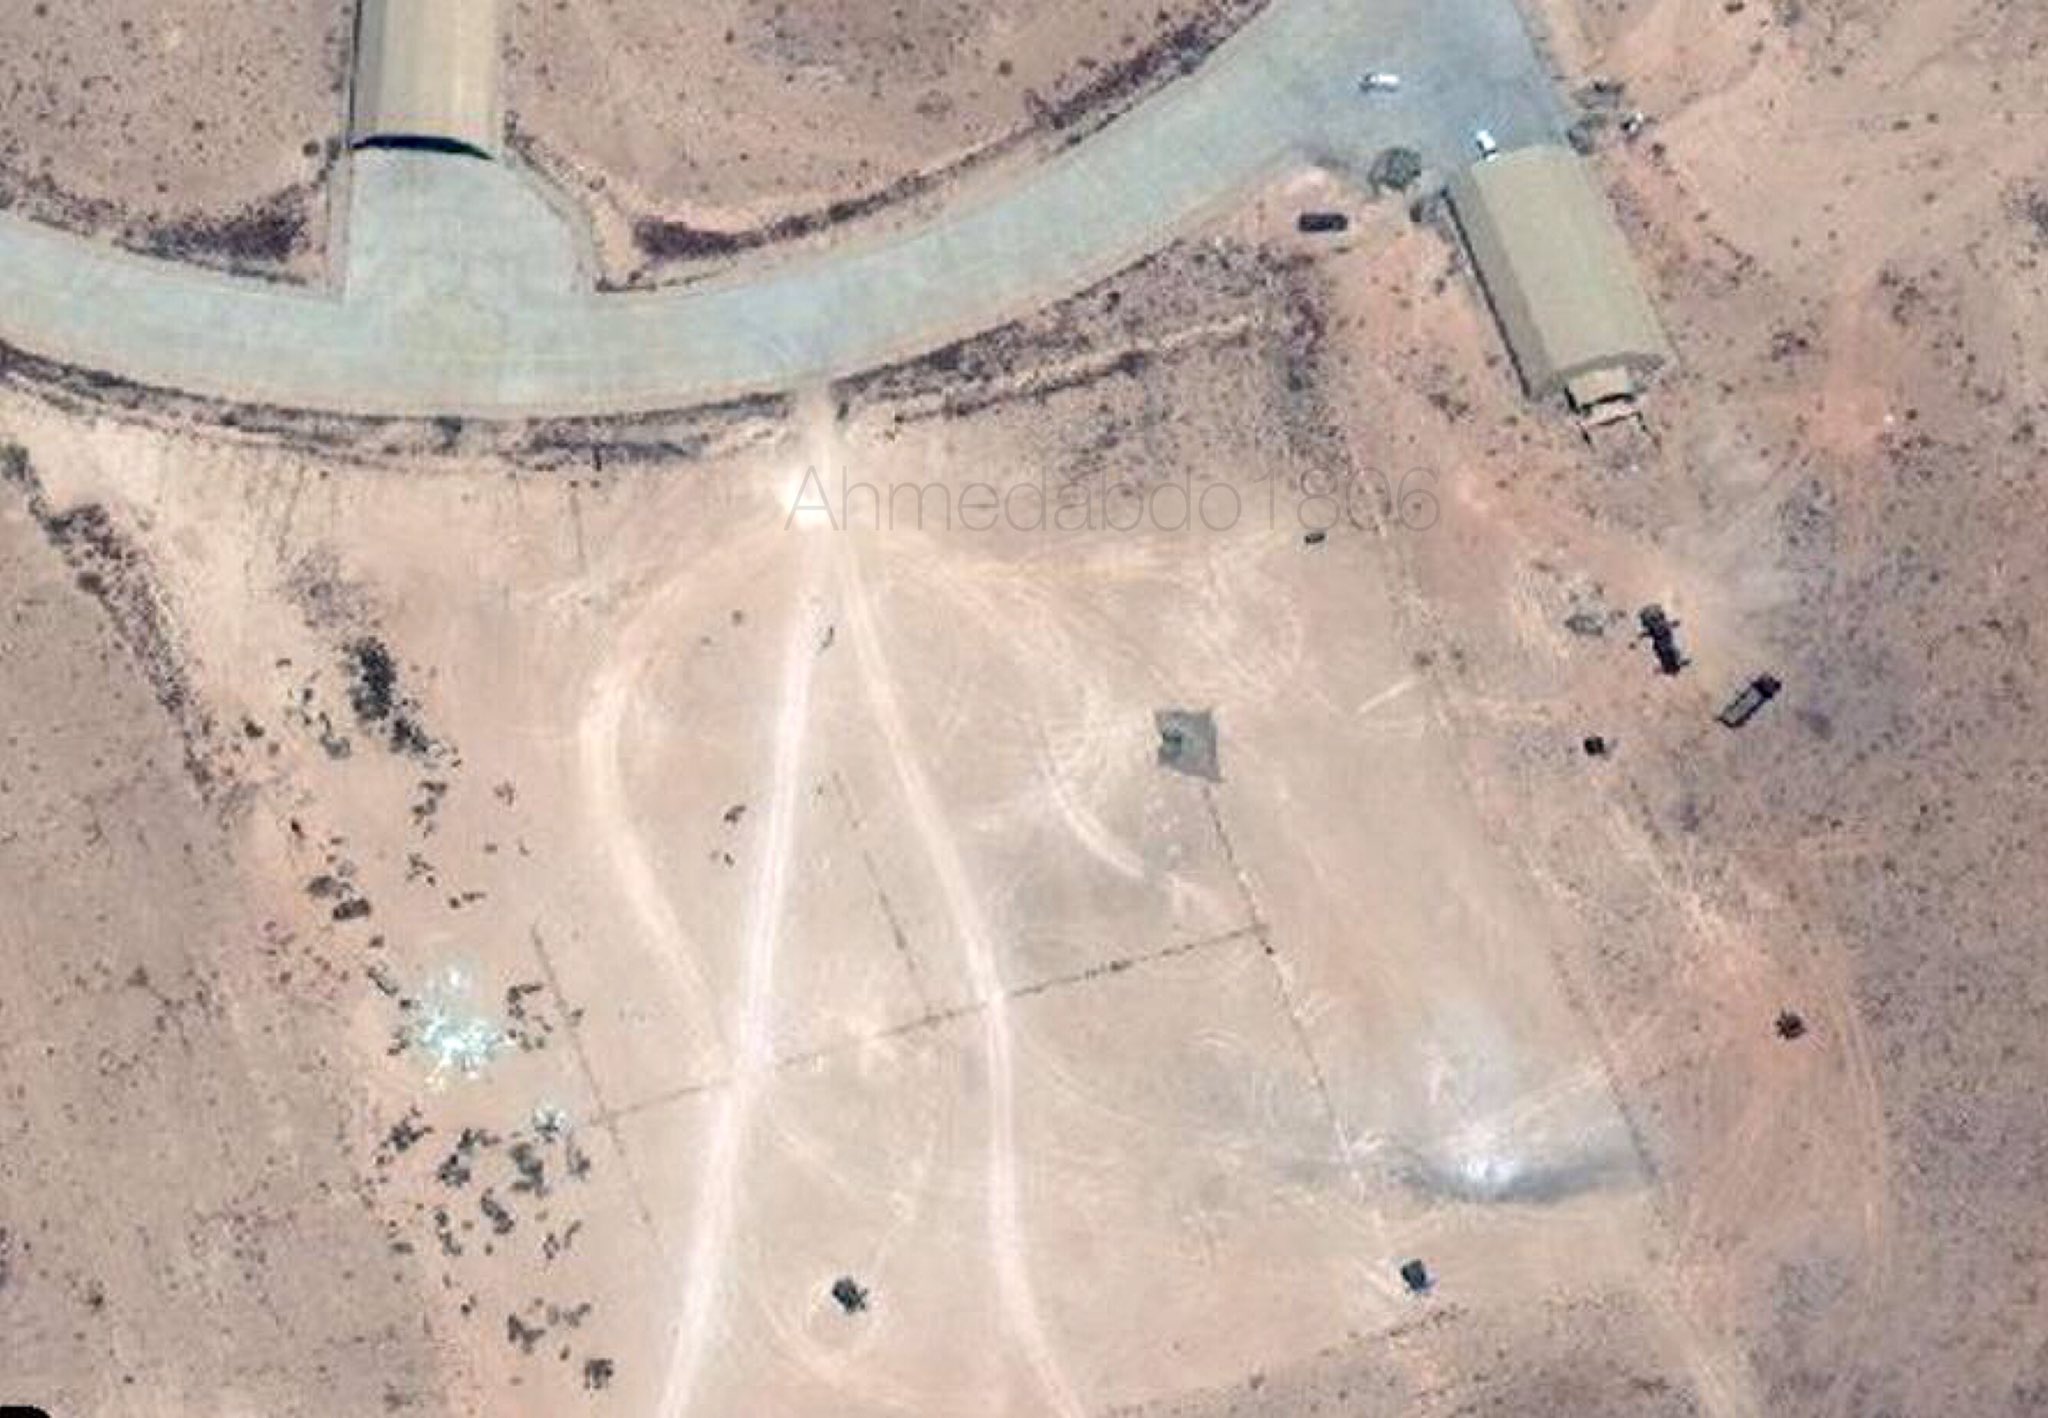 New satellite imagery shows the aftermath of the airstrikes targeted Turkish military equipment including at least one MIM-23 Hawk AD battery in Al-Watiya air base in Western Libya.